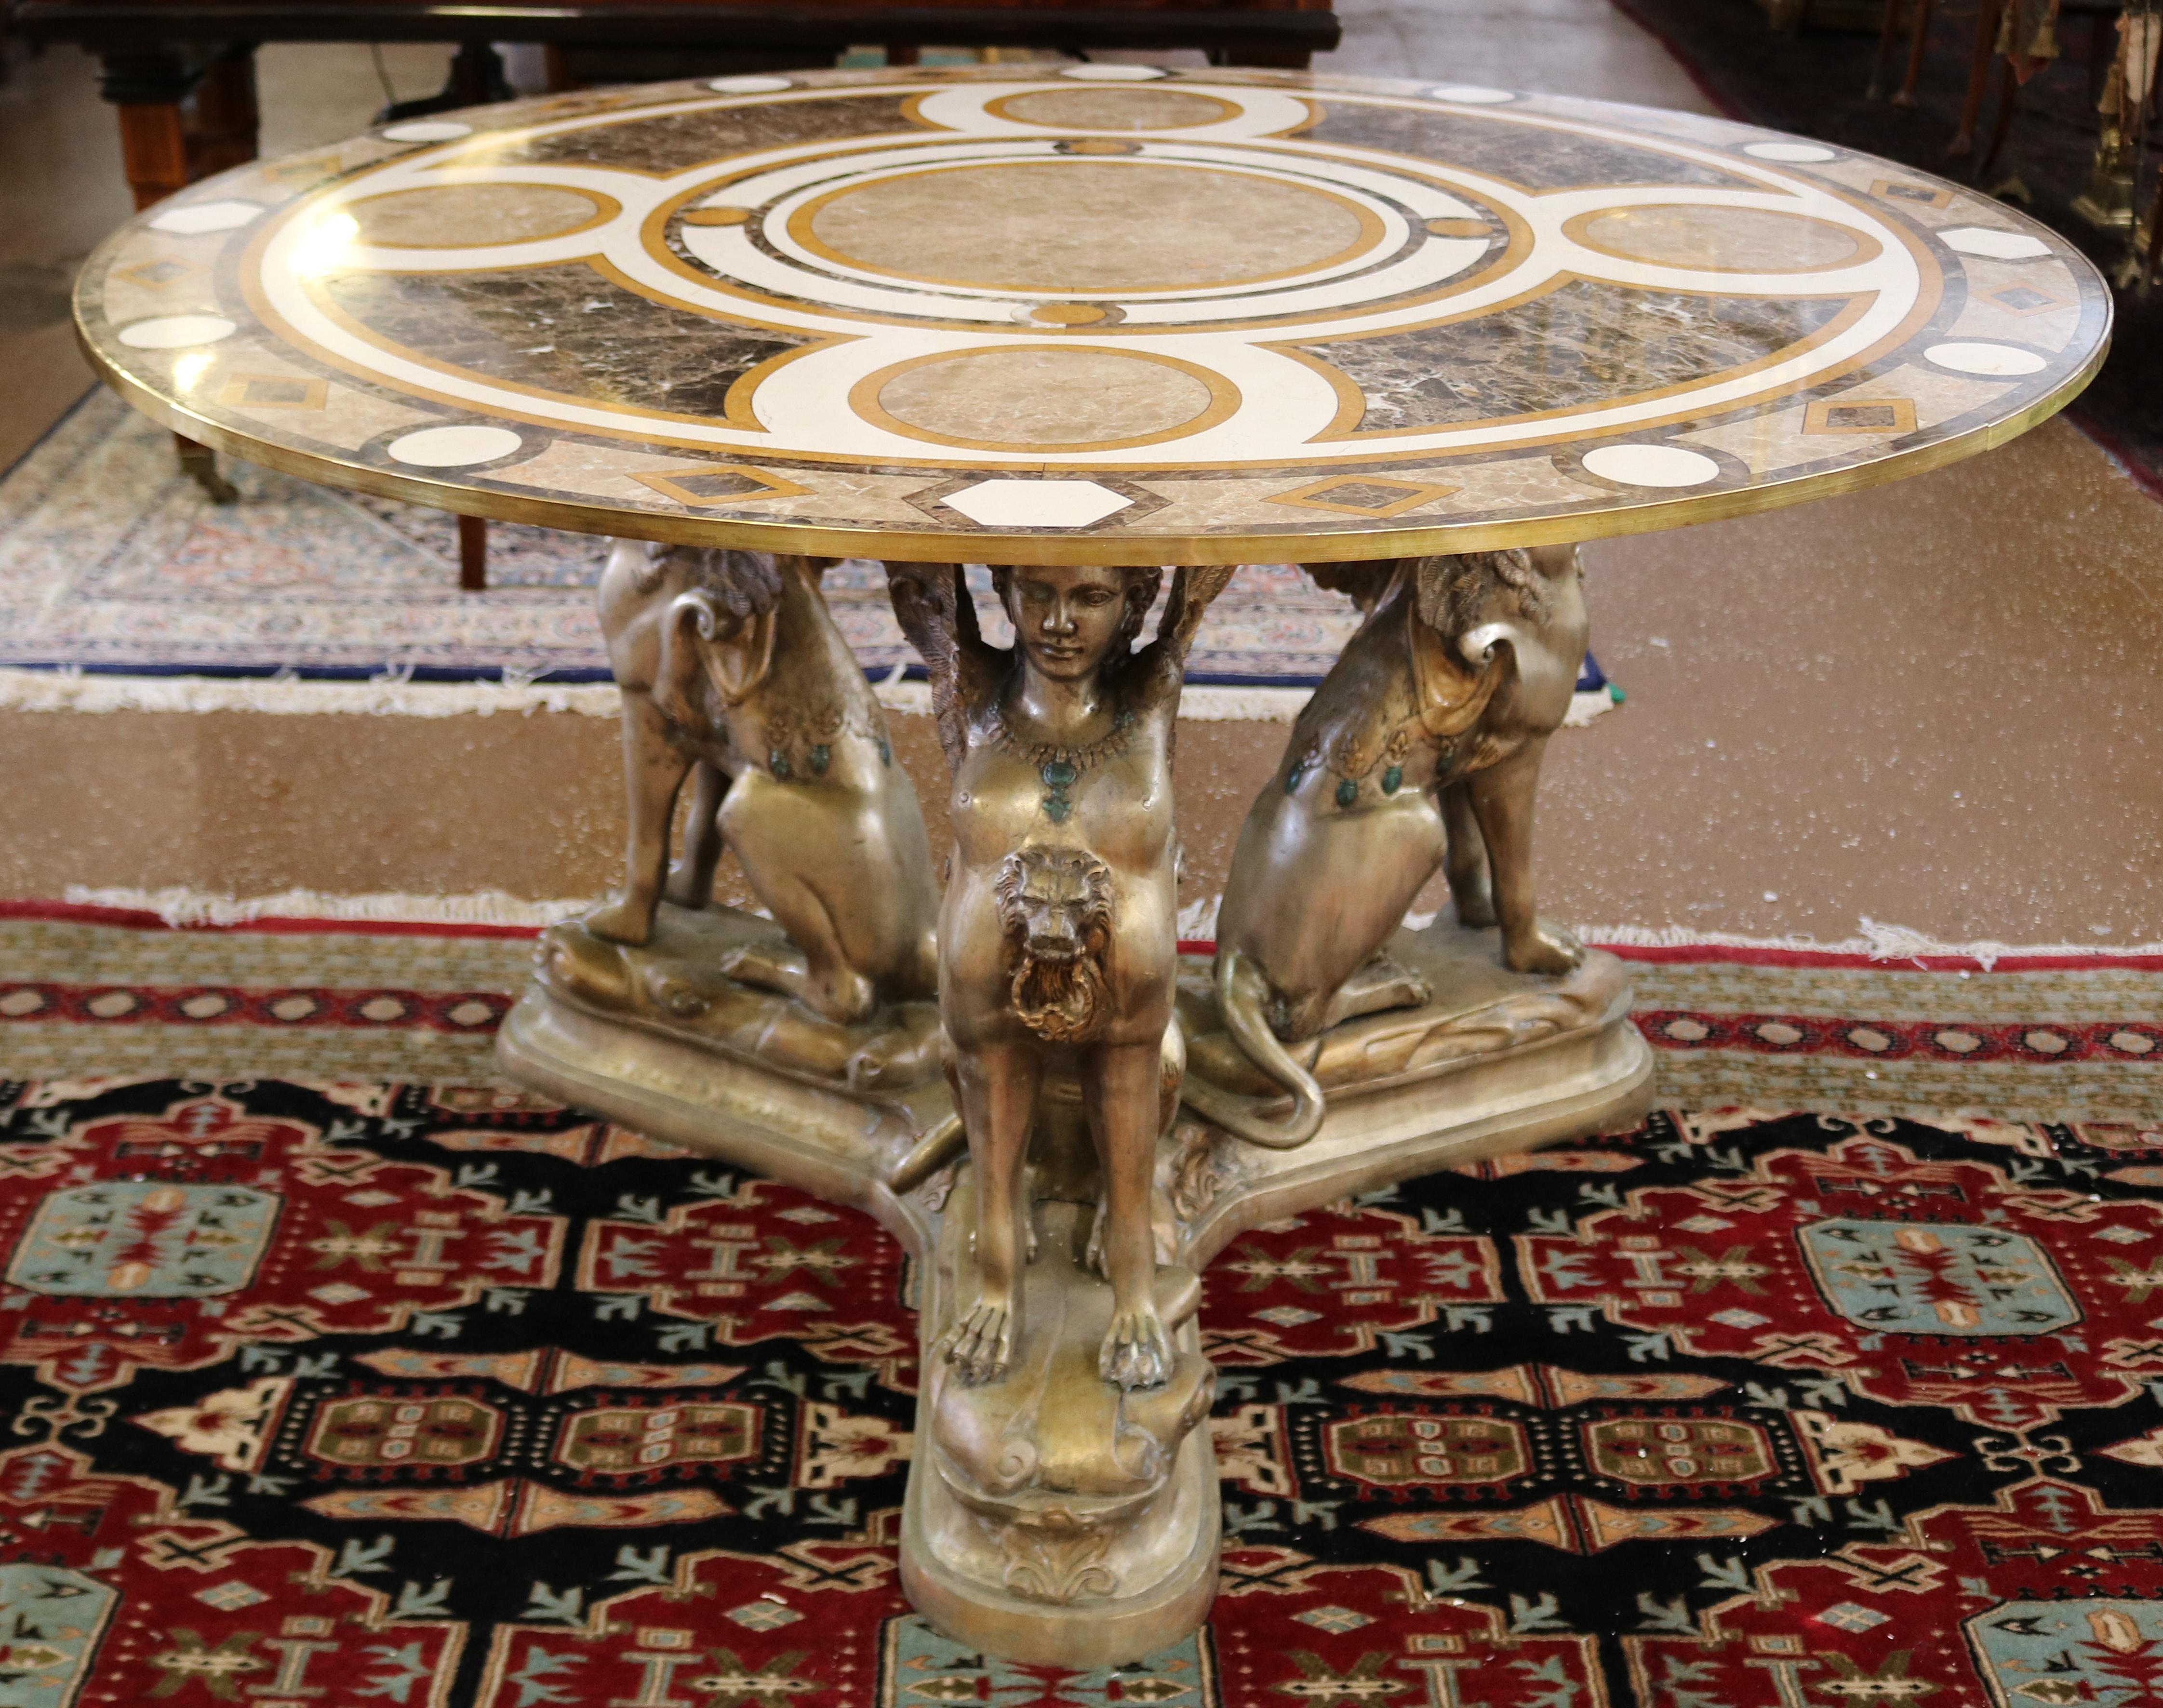 French Egyptian Revival Style Bronze & Marble Veneer Pietra Dura Top Center Table

Dimensions : 48 X 48 X 29

This stunning veneered inlaid marble top bronze table is after the model by Val D'Osne a foundry in France most famous for the Paris